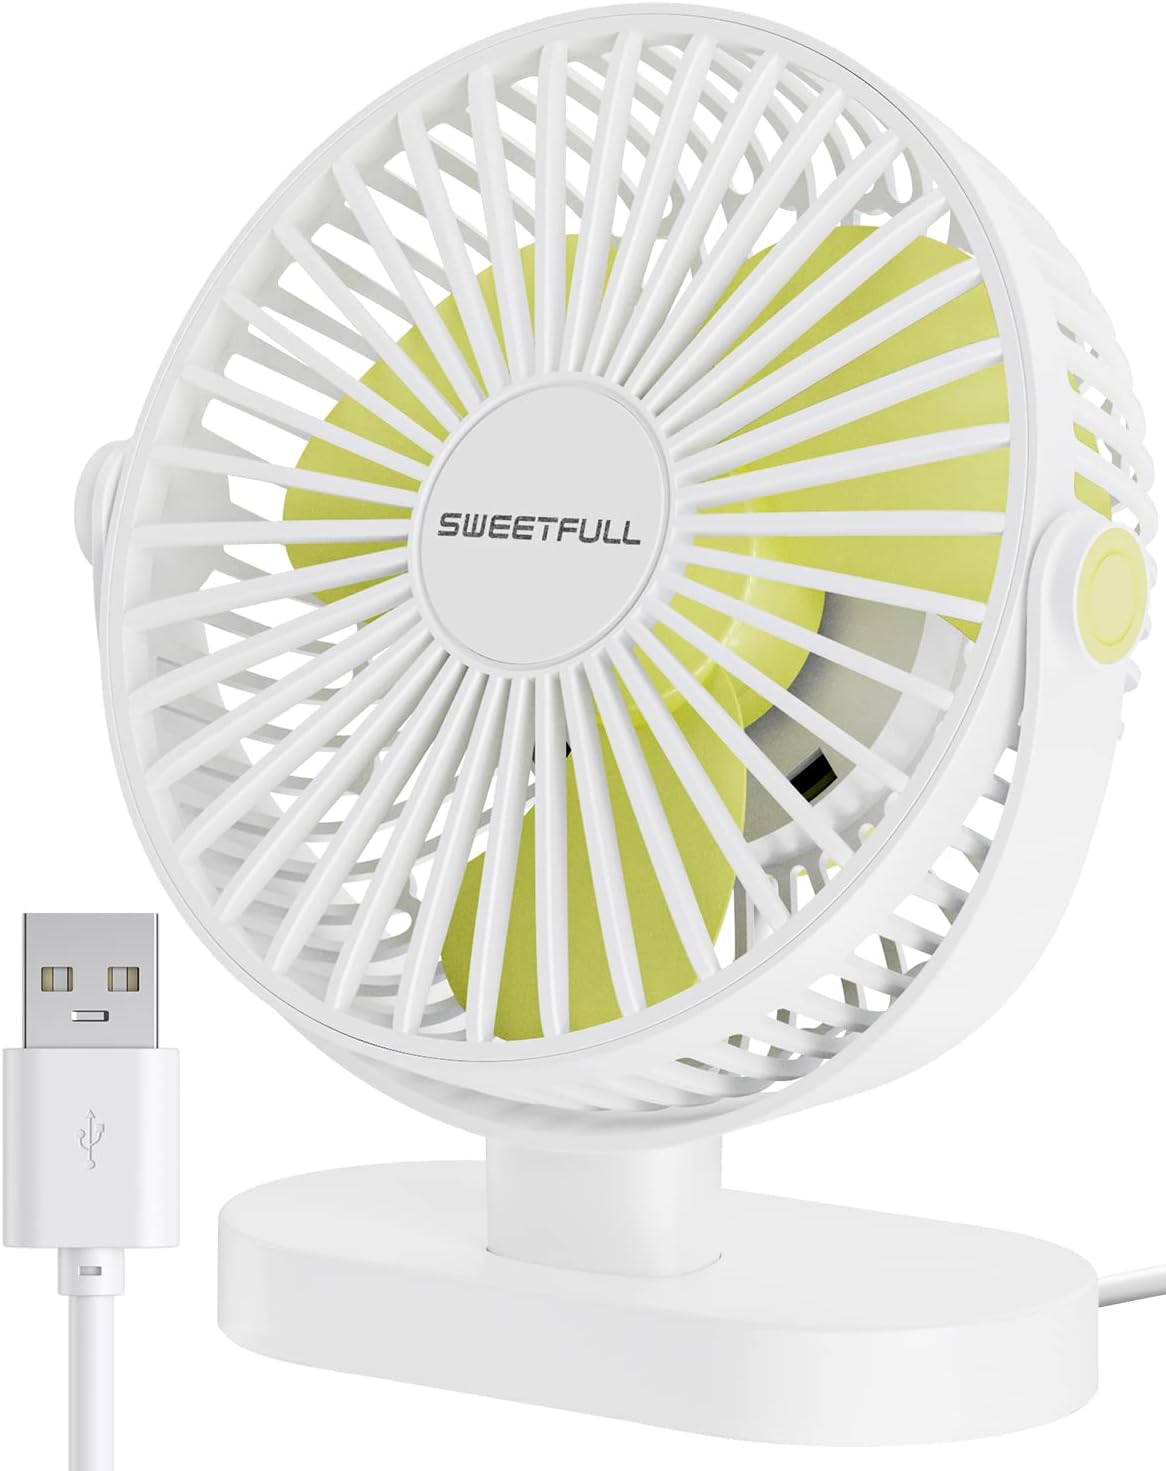 SWEETFULL USB Desk Fan Small Quiet - 3 Speeds Mini Personal Portable Fan 360 Rotation Adjustable, 6 Inch Office Table Cooling Gadgets on Desktop (white yellow)